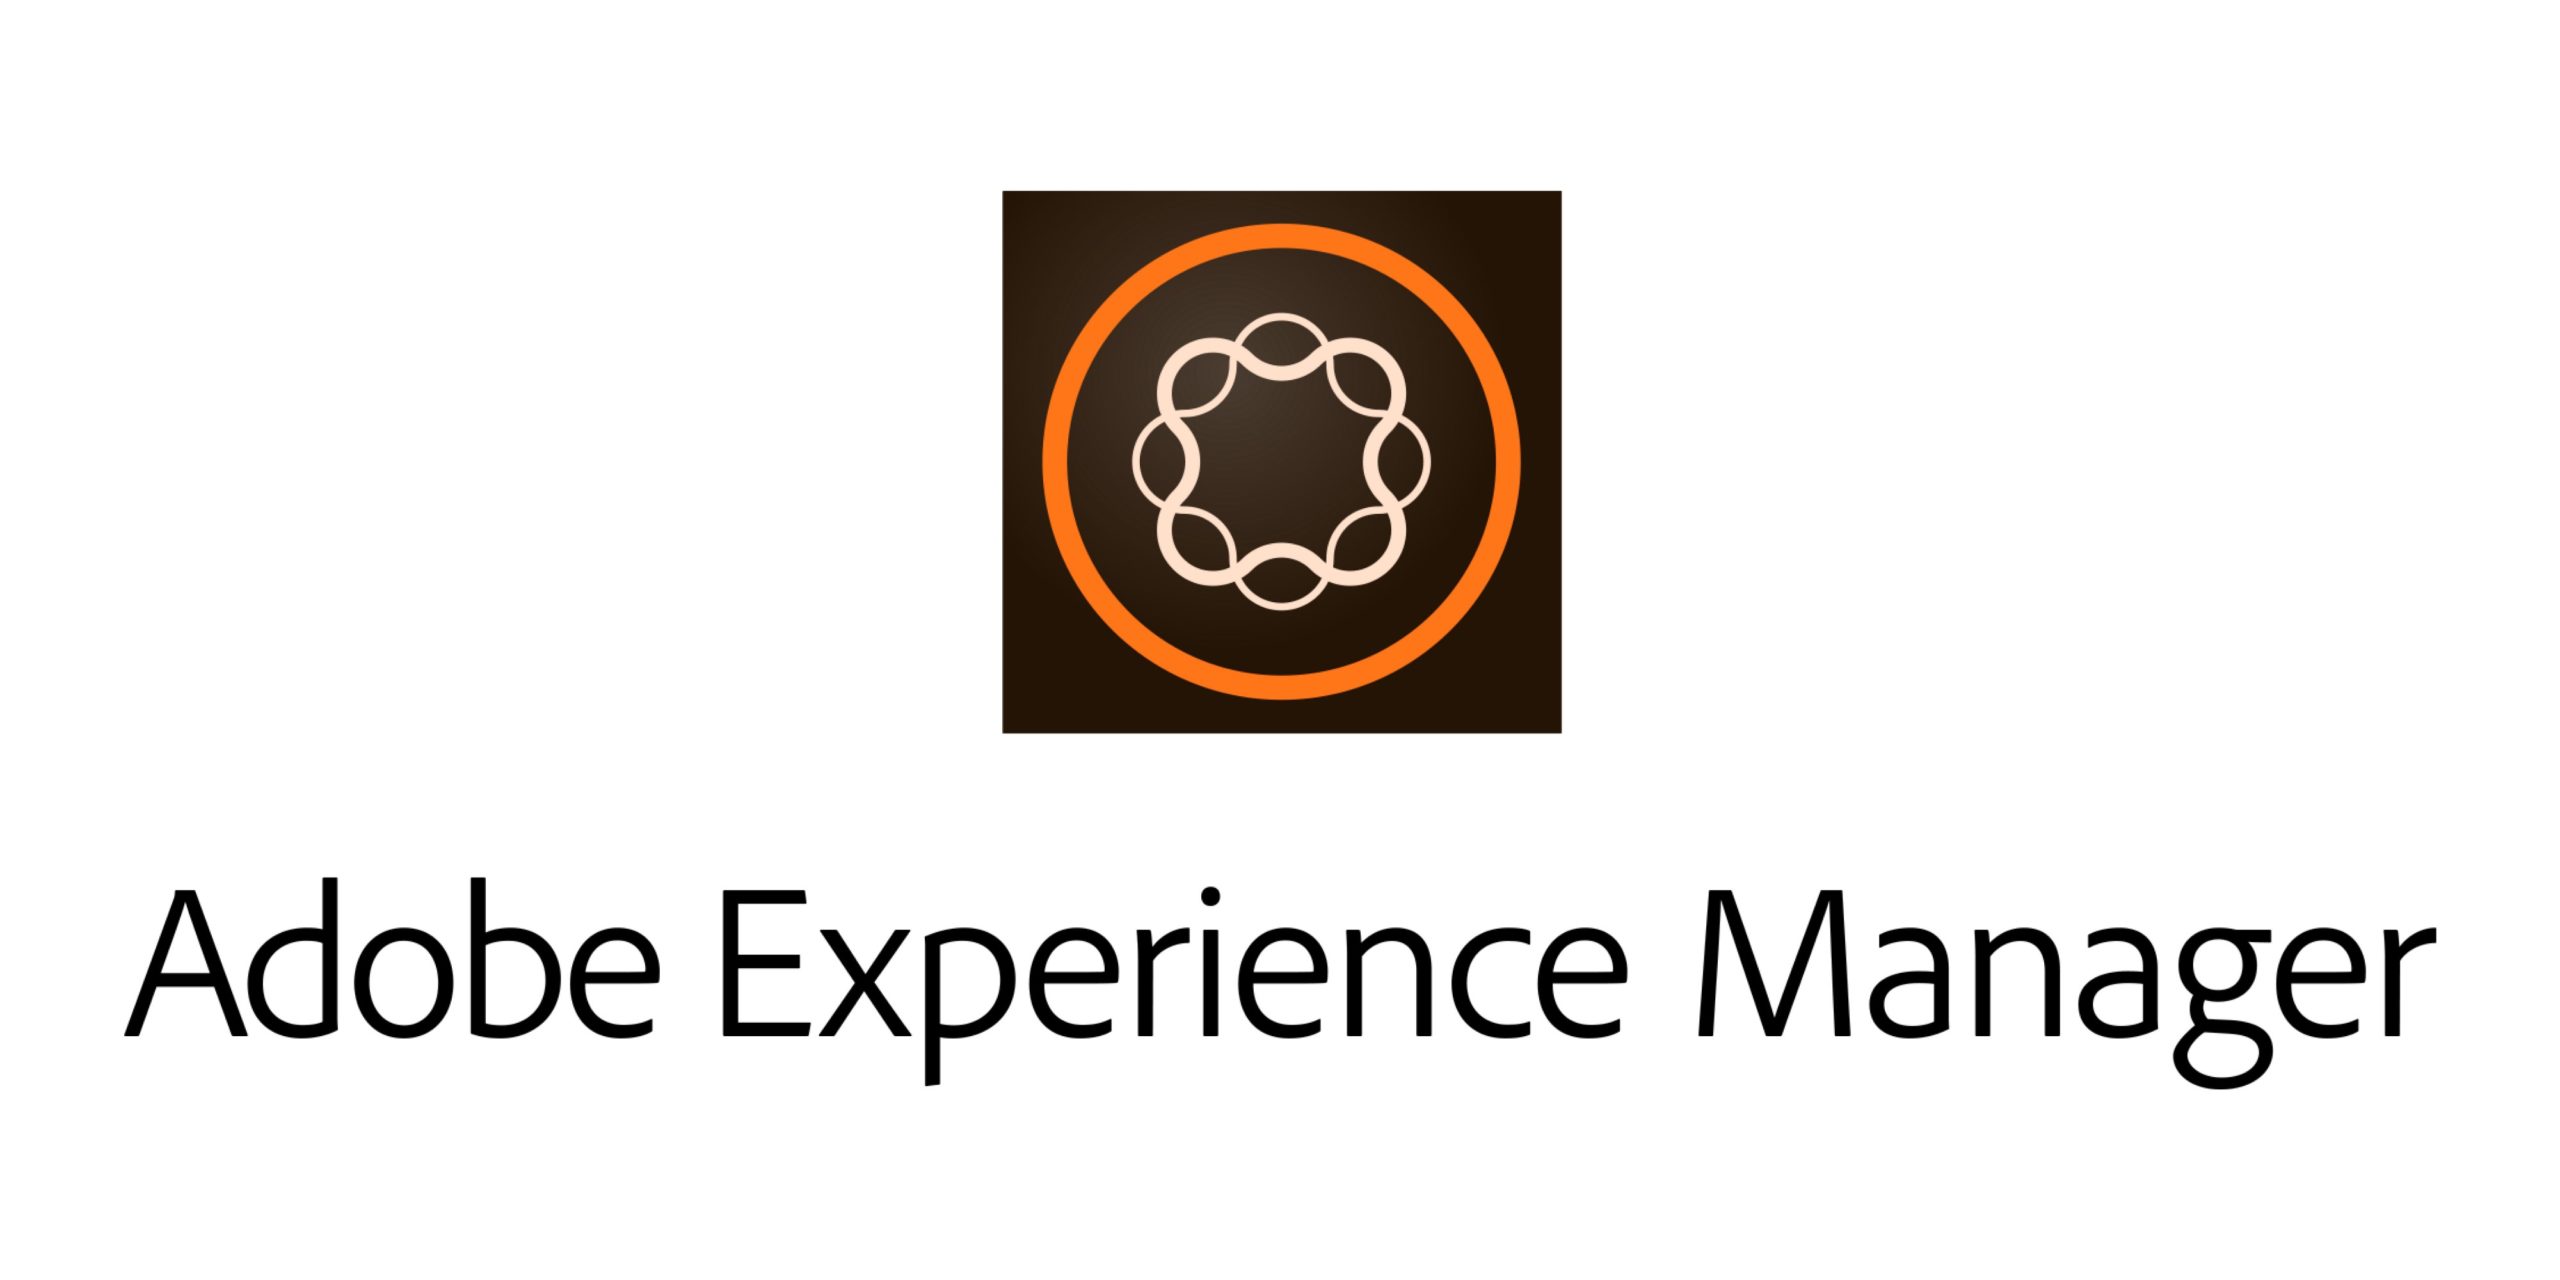 History of Adobe Experience Manager